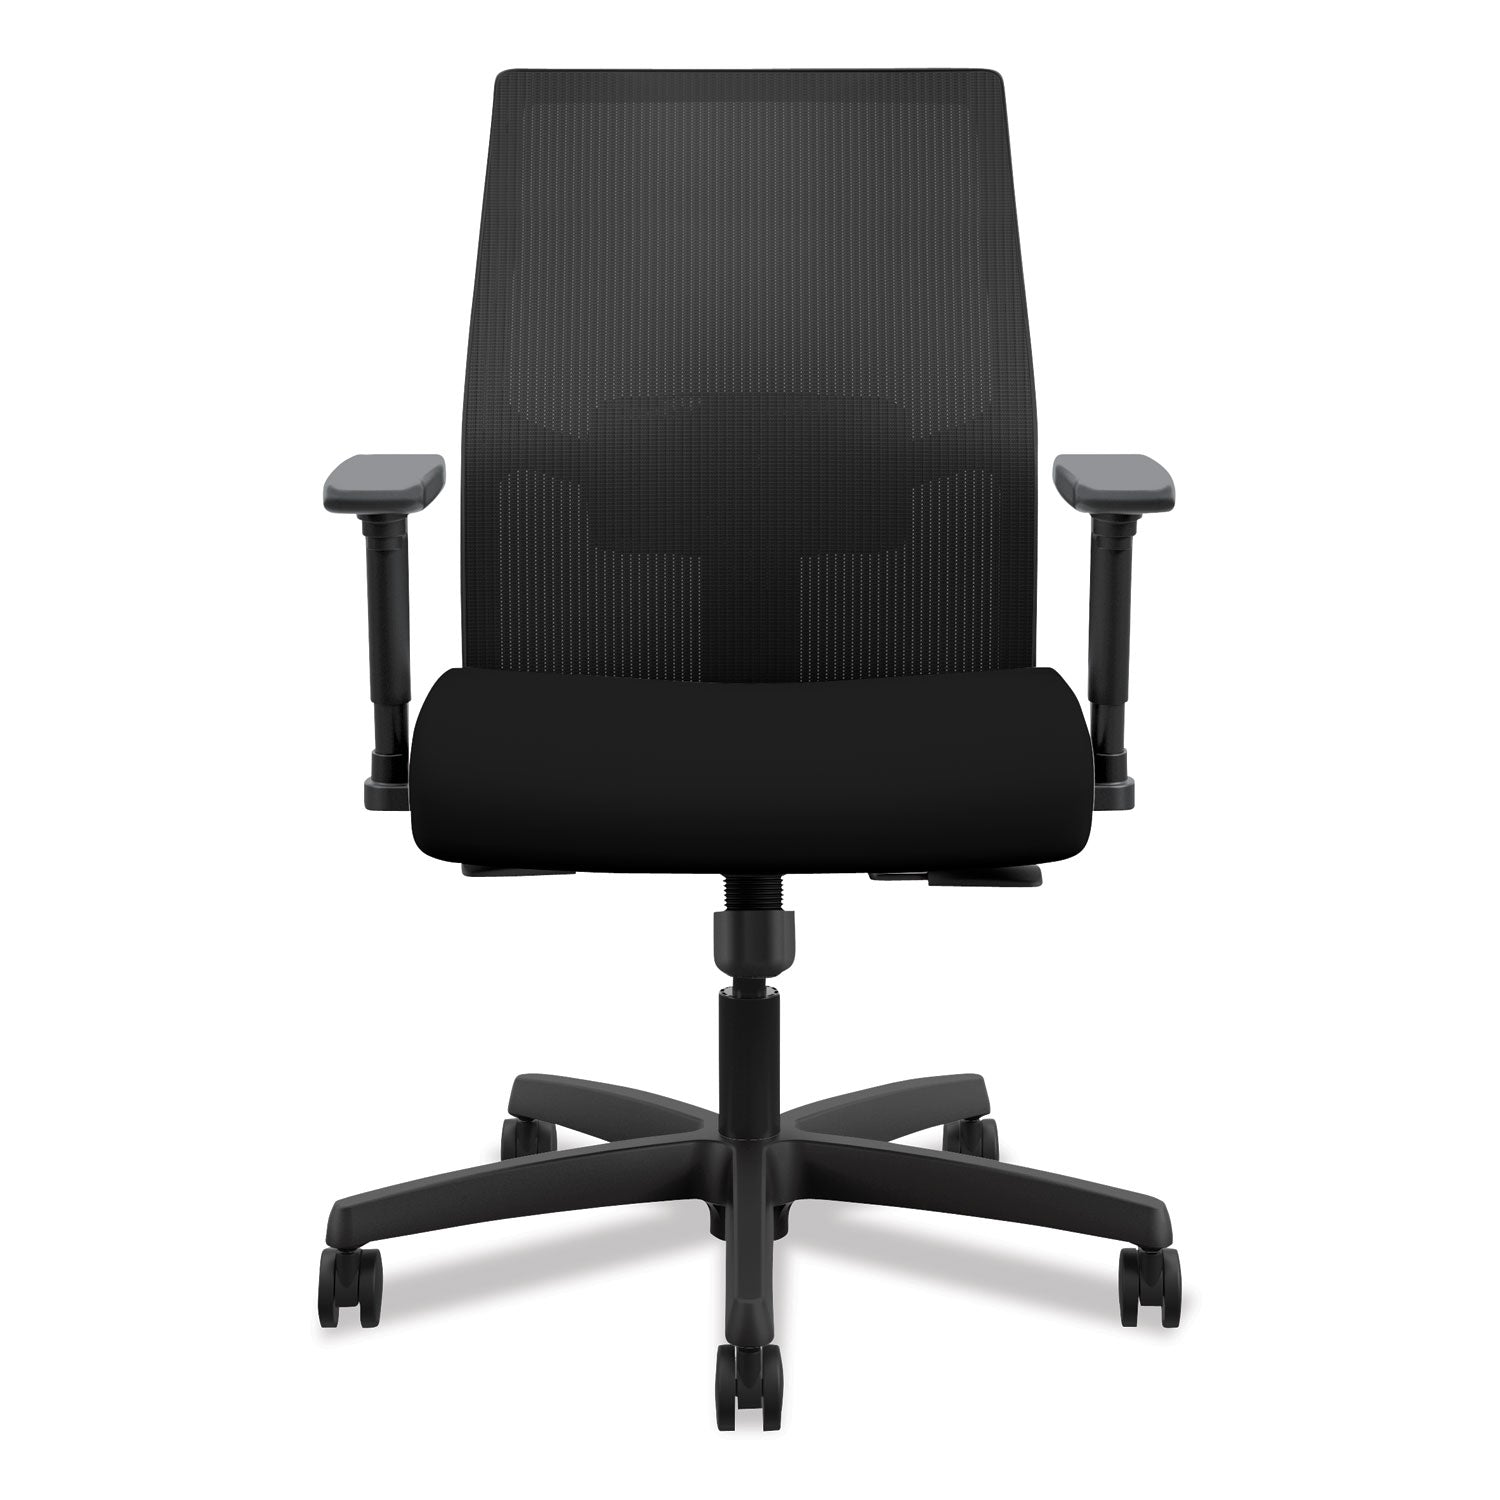 ignition-20-4-way-stretch-low-back-mesh-task-chair-supports-up-to-300-lb-1675-to-2125-seat-height-black_honitlmk1mc10b - 2